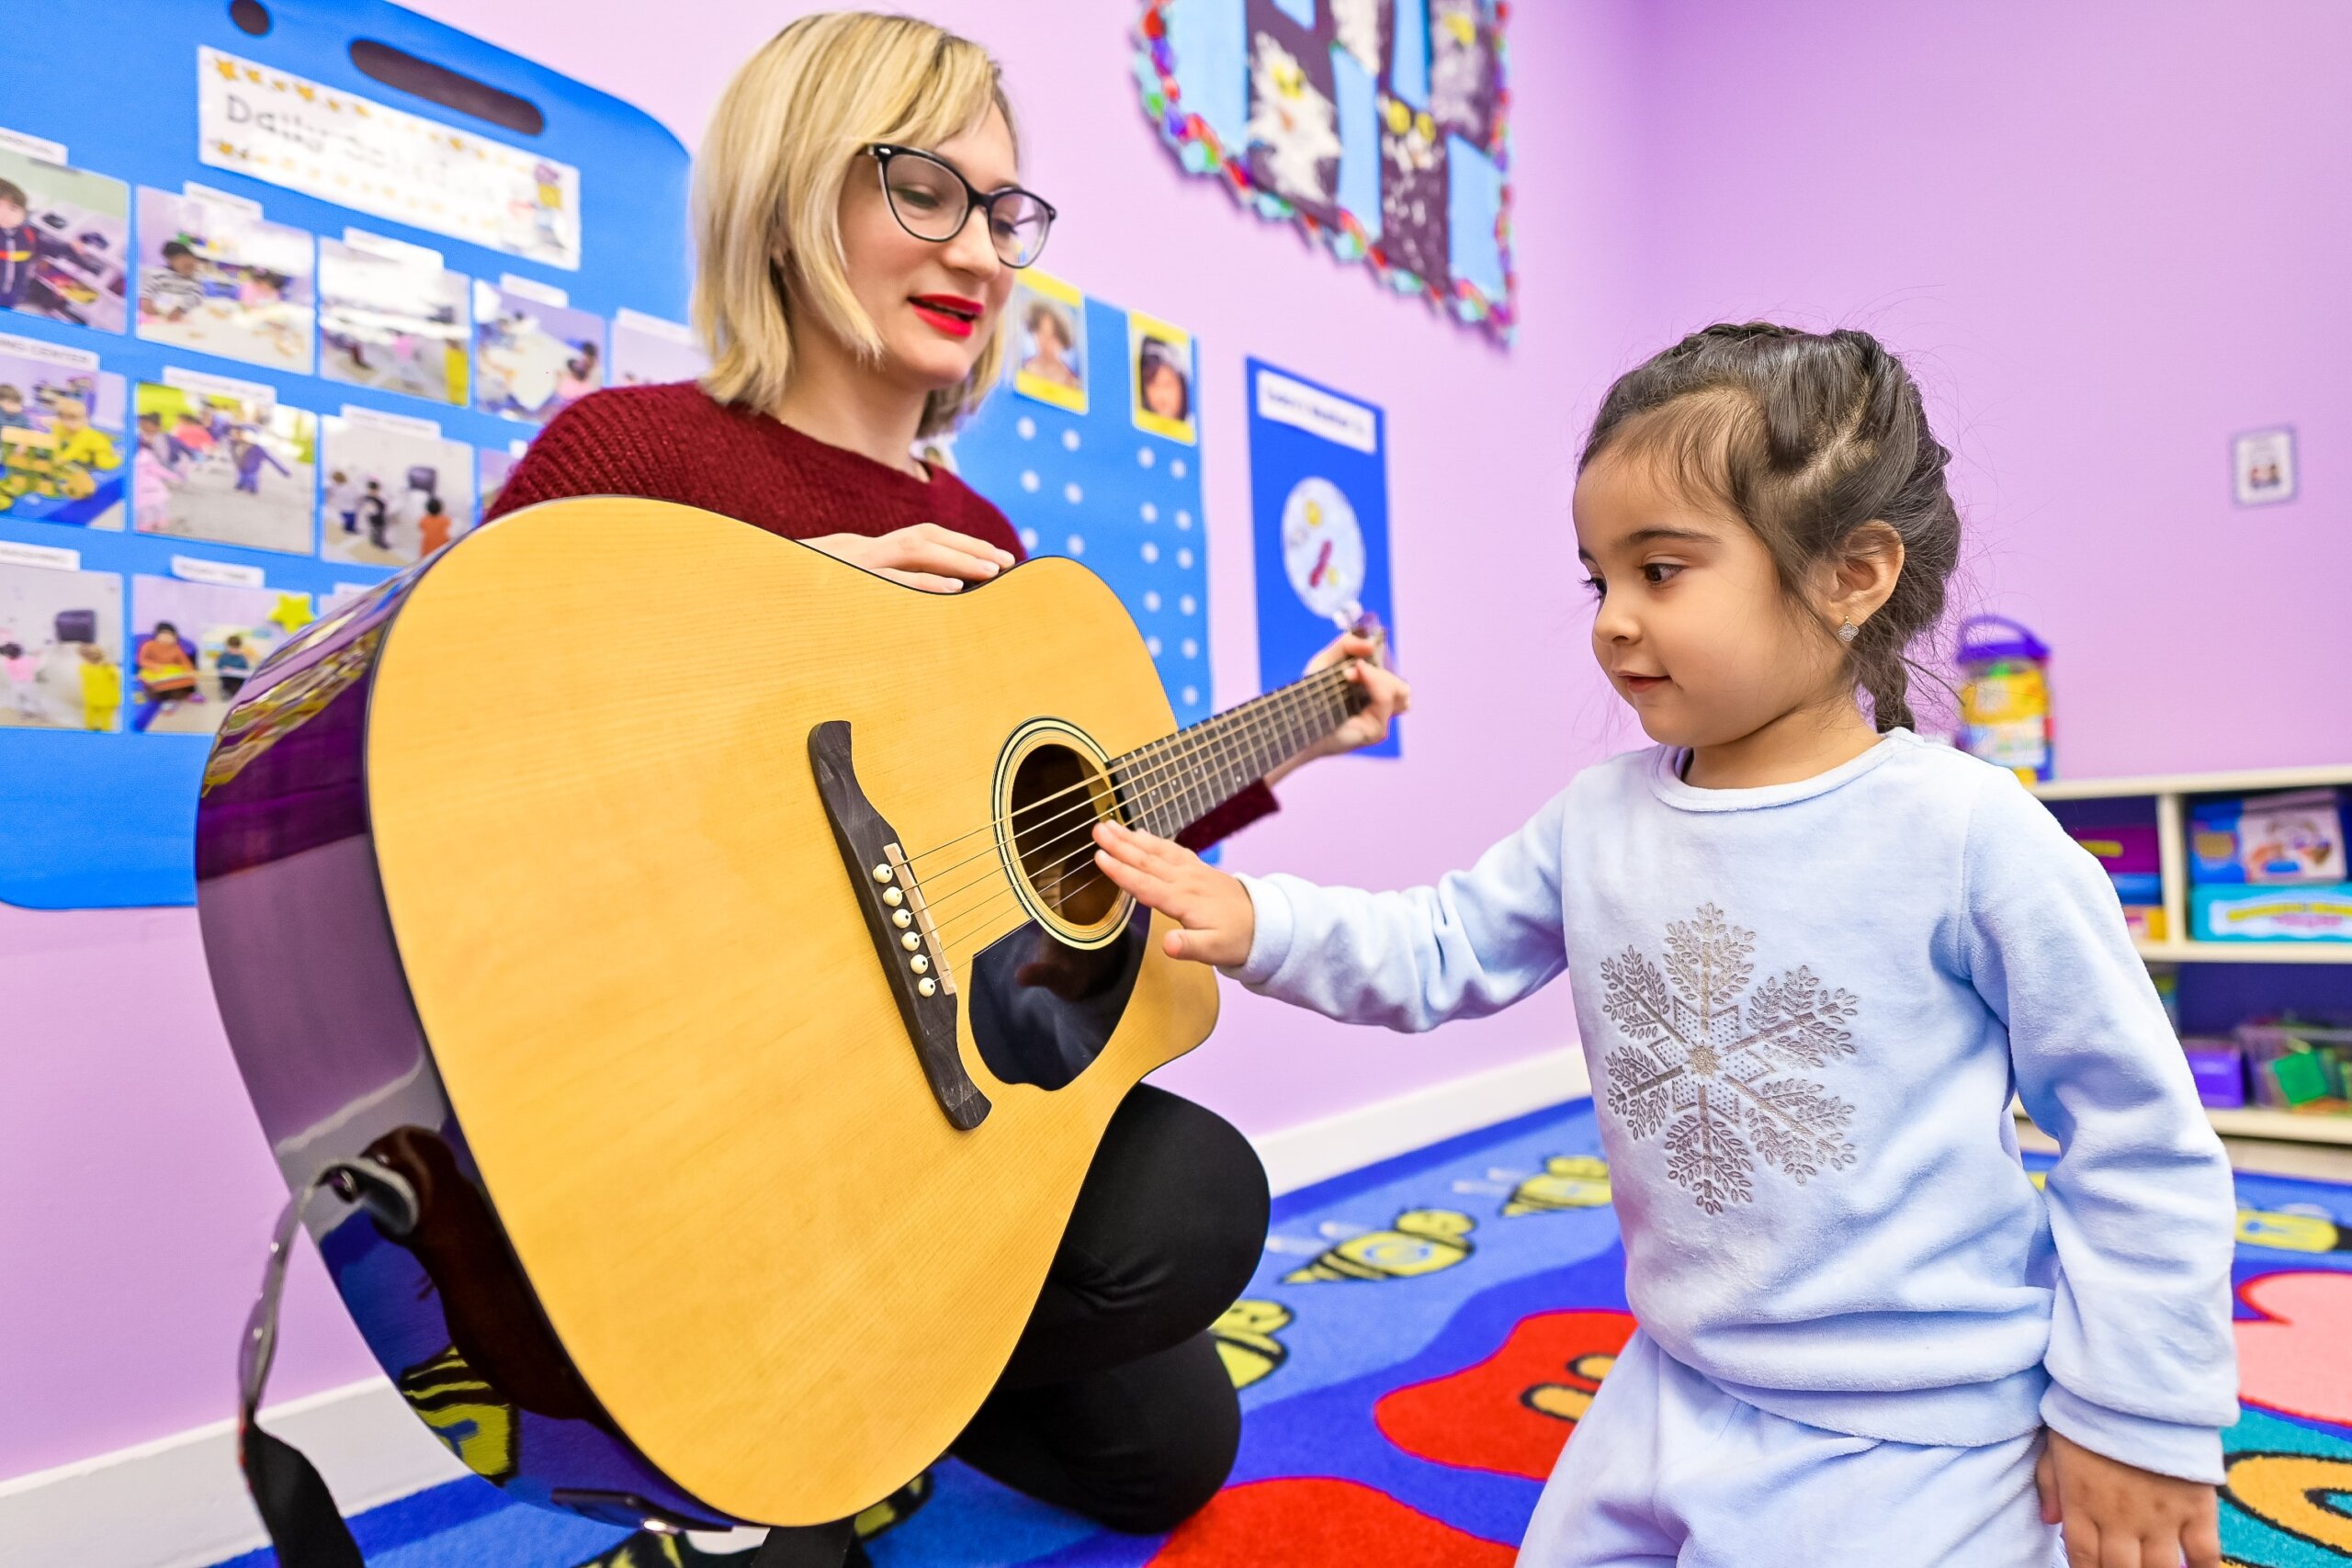 Toddler touching strings of a guitar played by a teacher in a colorful classroom